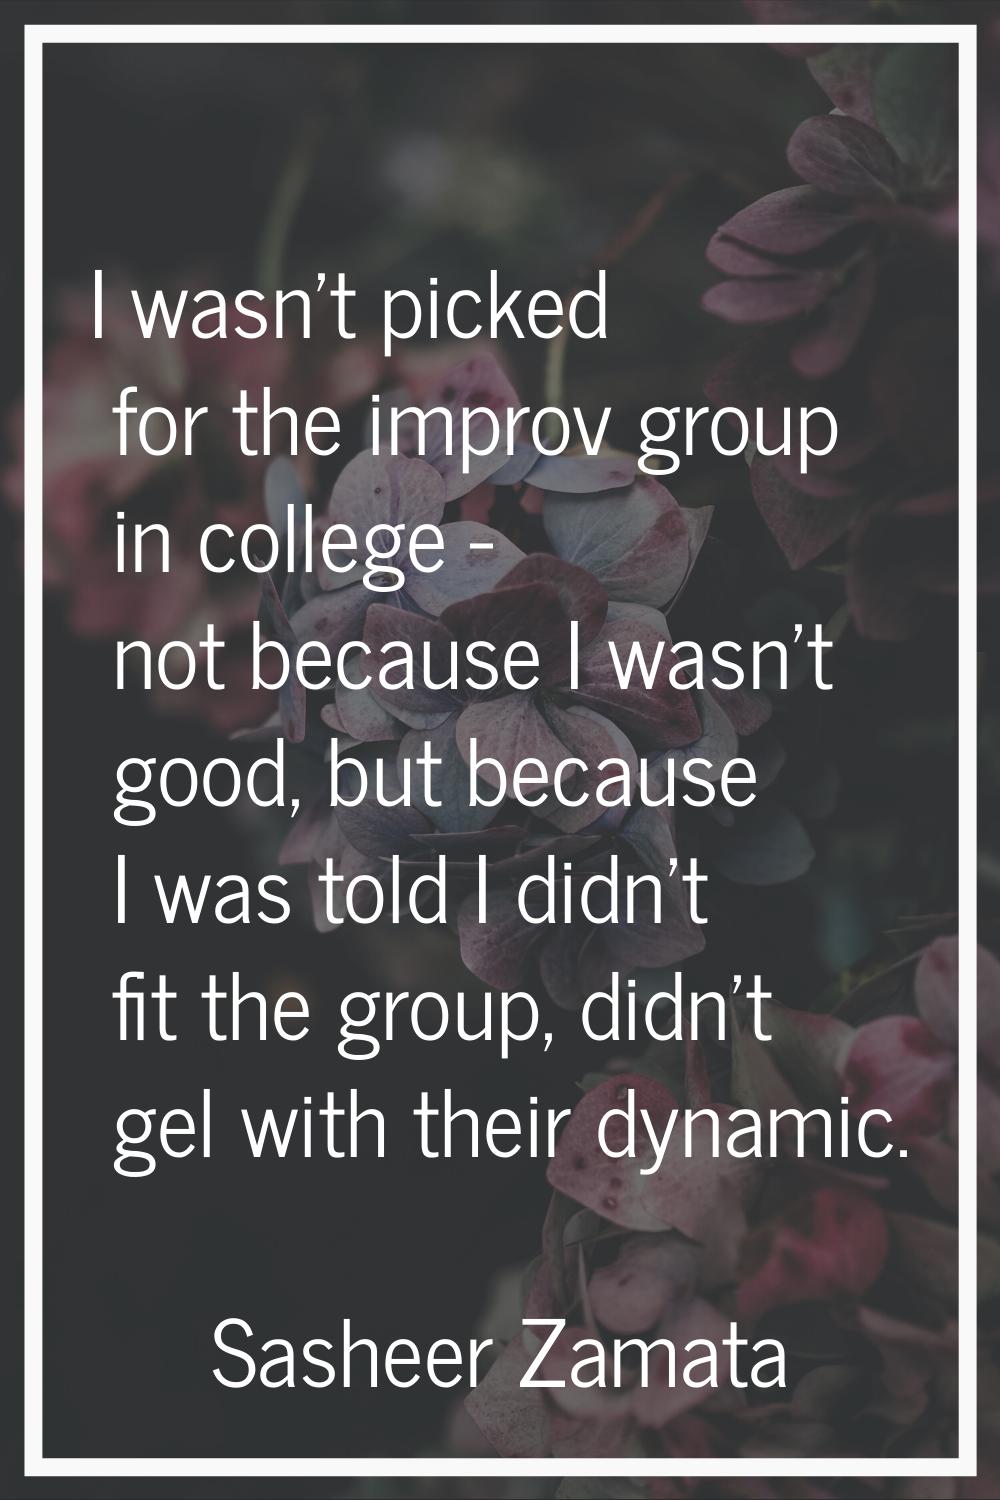 I wasn't picked for the improv group in college - not because I wasn't good, but because I was told